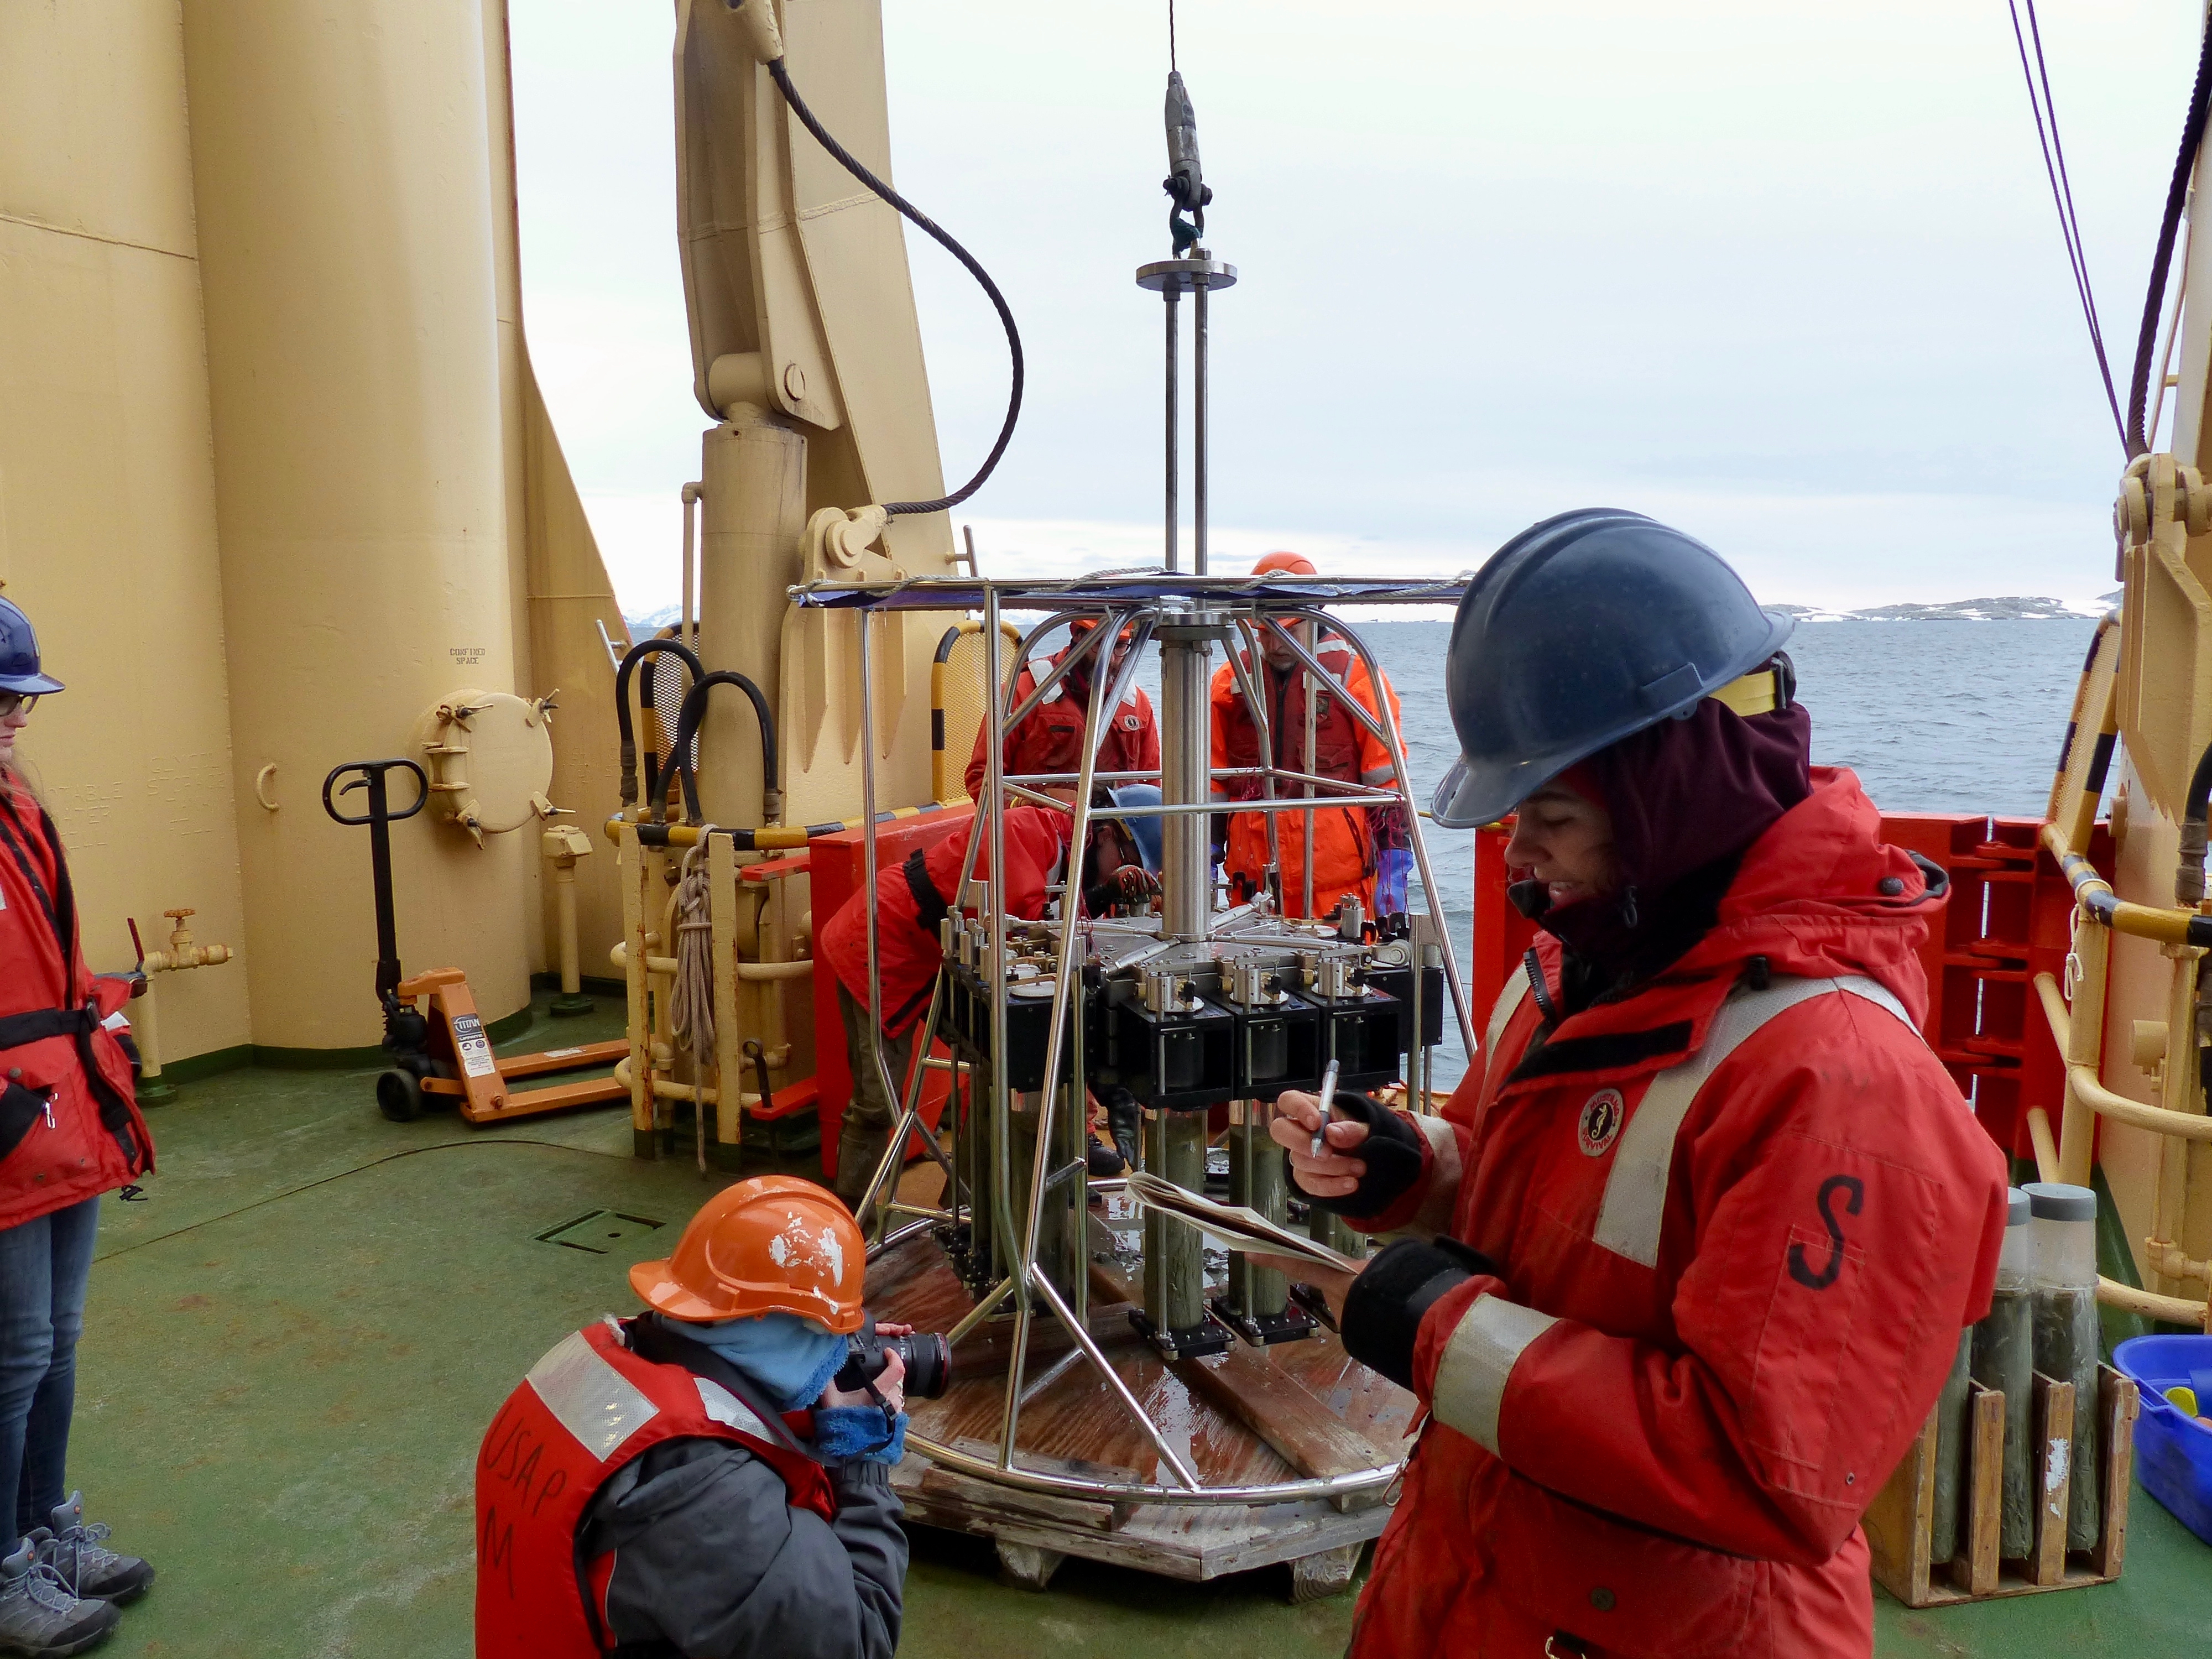 The Megacore has just been brought back from the seafloor with 11 successful sediment cores. 